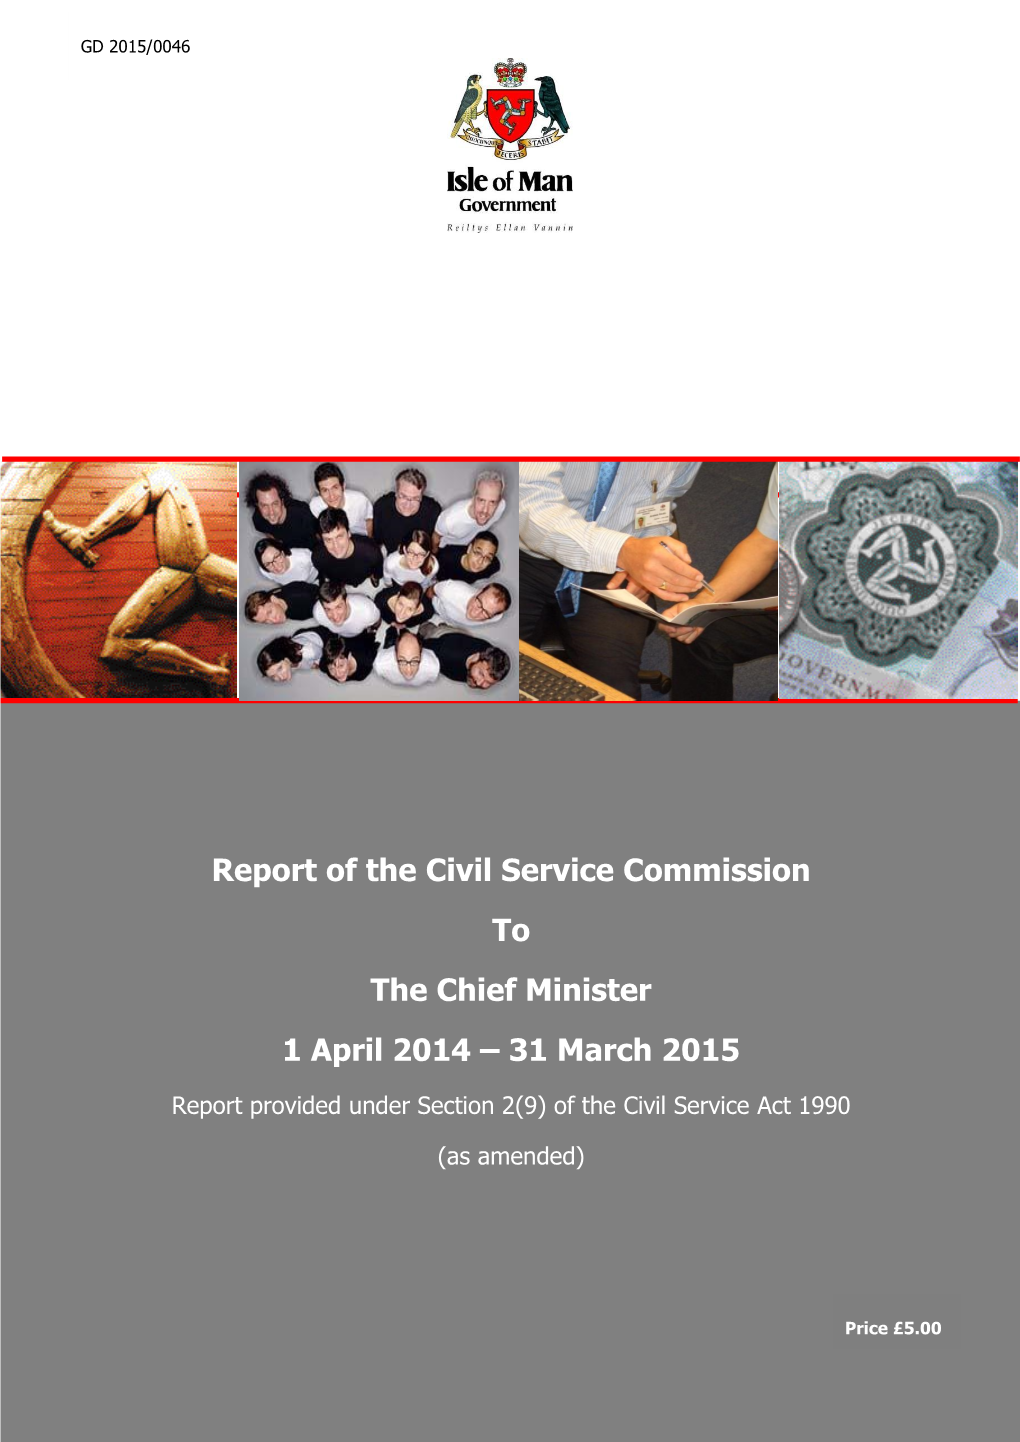 Report of the Civil Service Commission to the Chief Minister 1 April 2014 – 31 March 2015